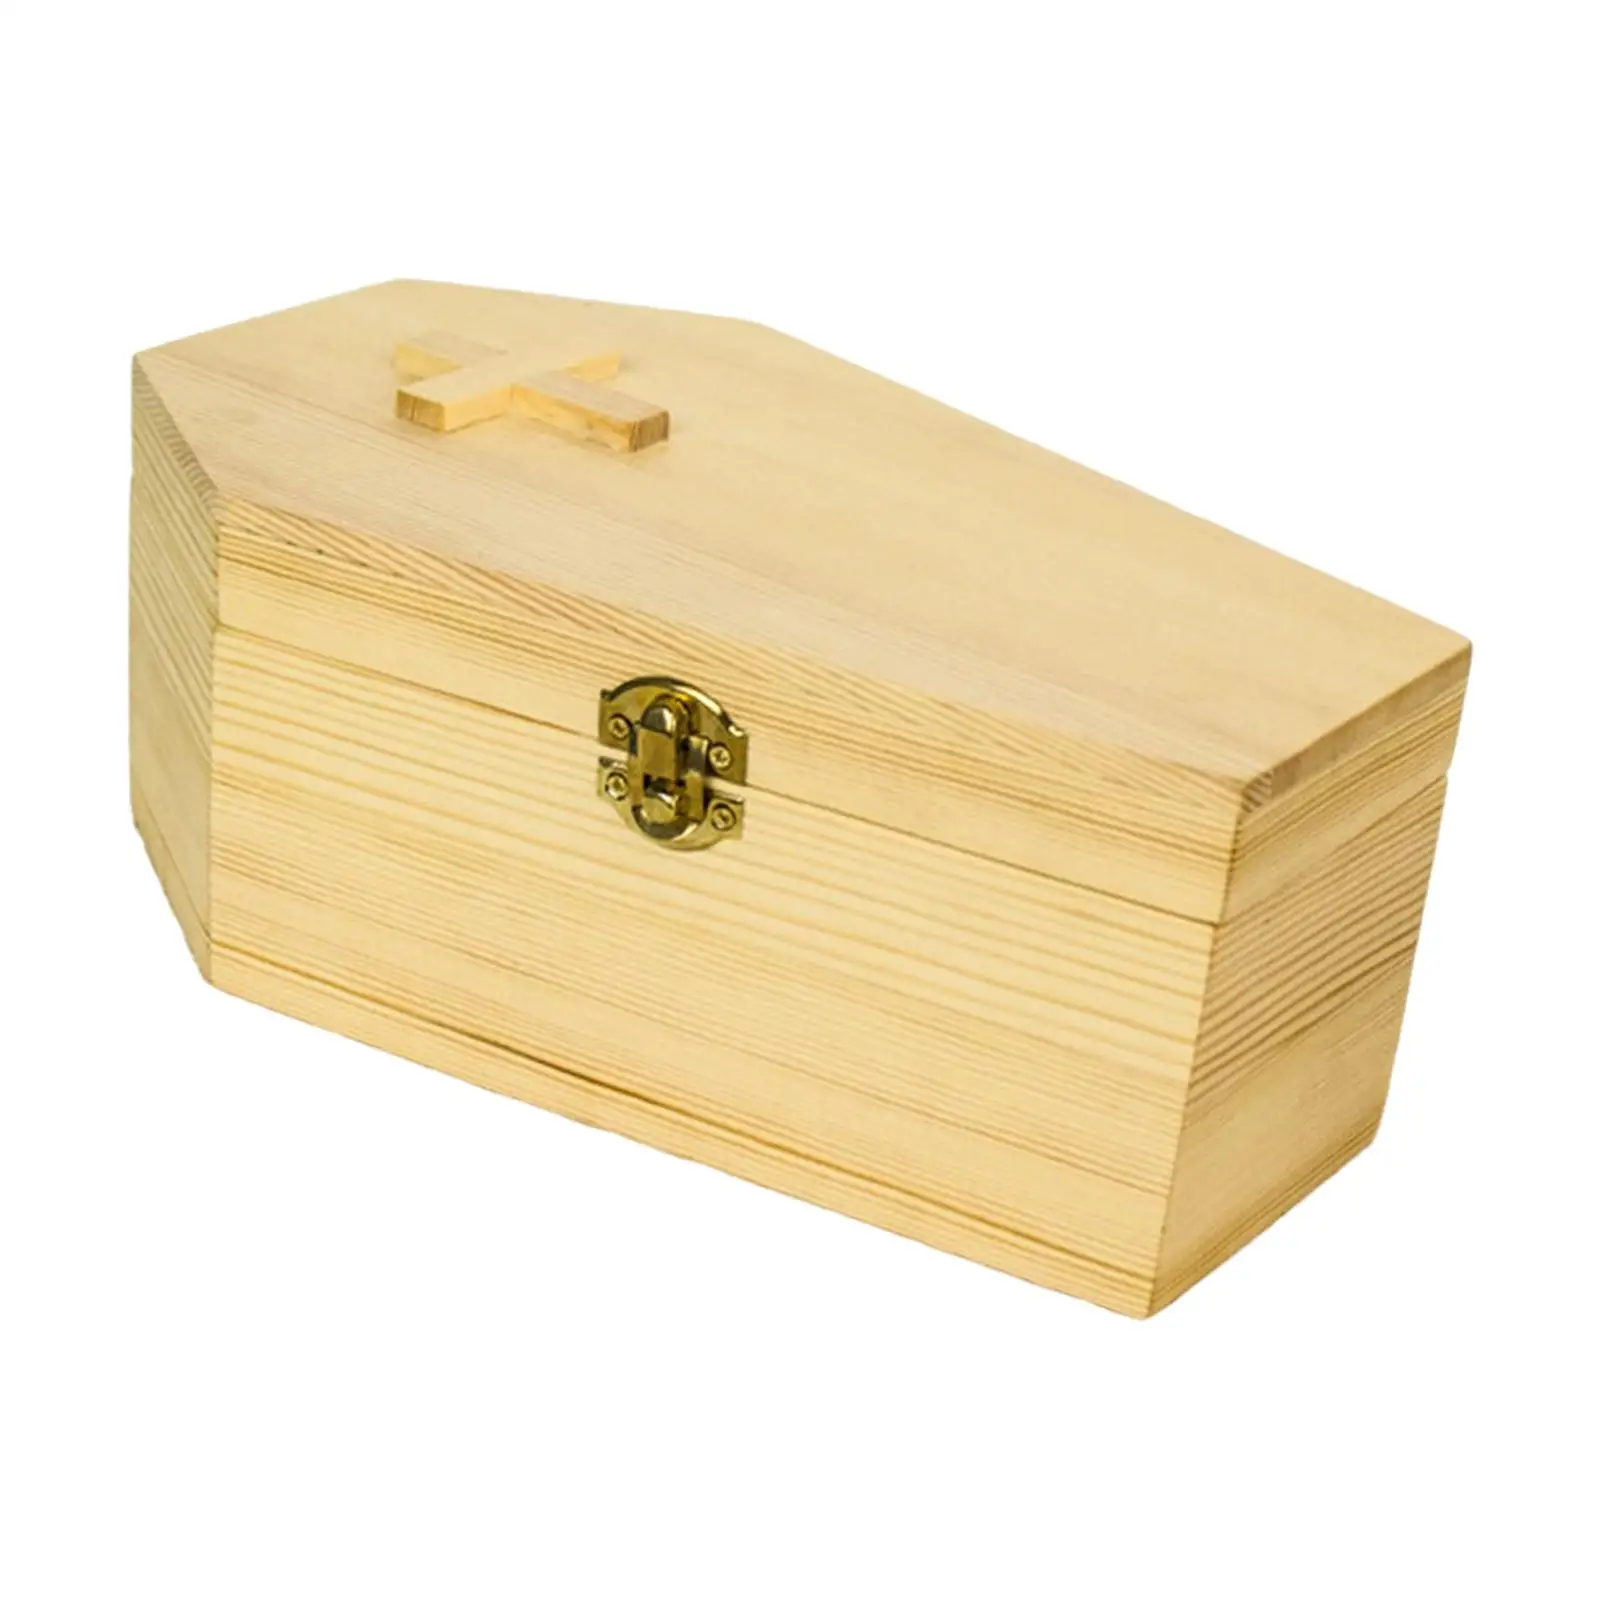 Wooden Pet Cremation Urn for Dogs Memorial Keepsake Precious Souvenirs Remembrance for Funerary Caskets Supplies